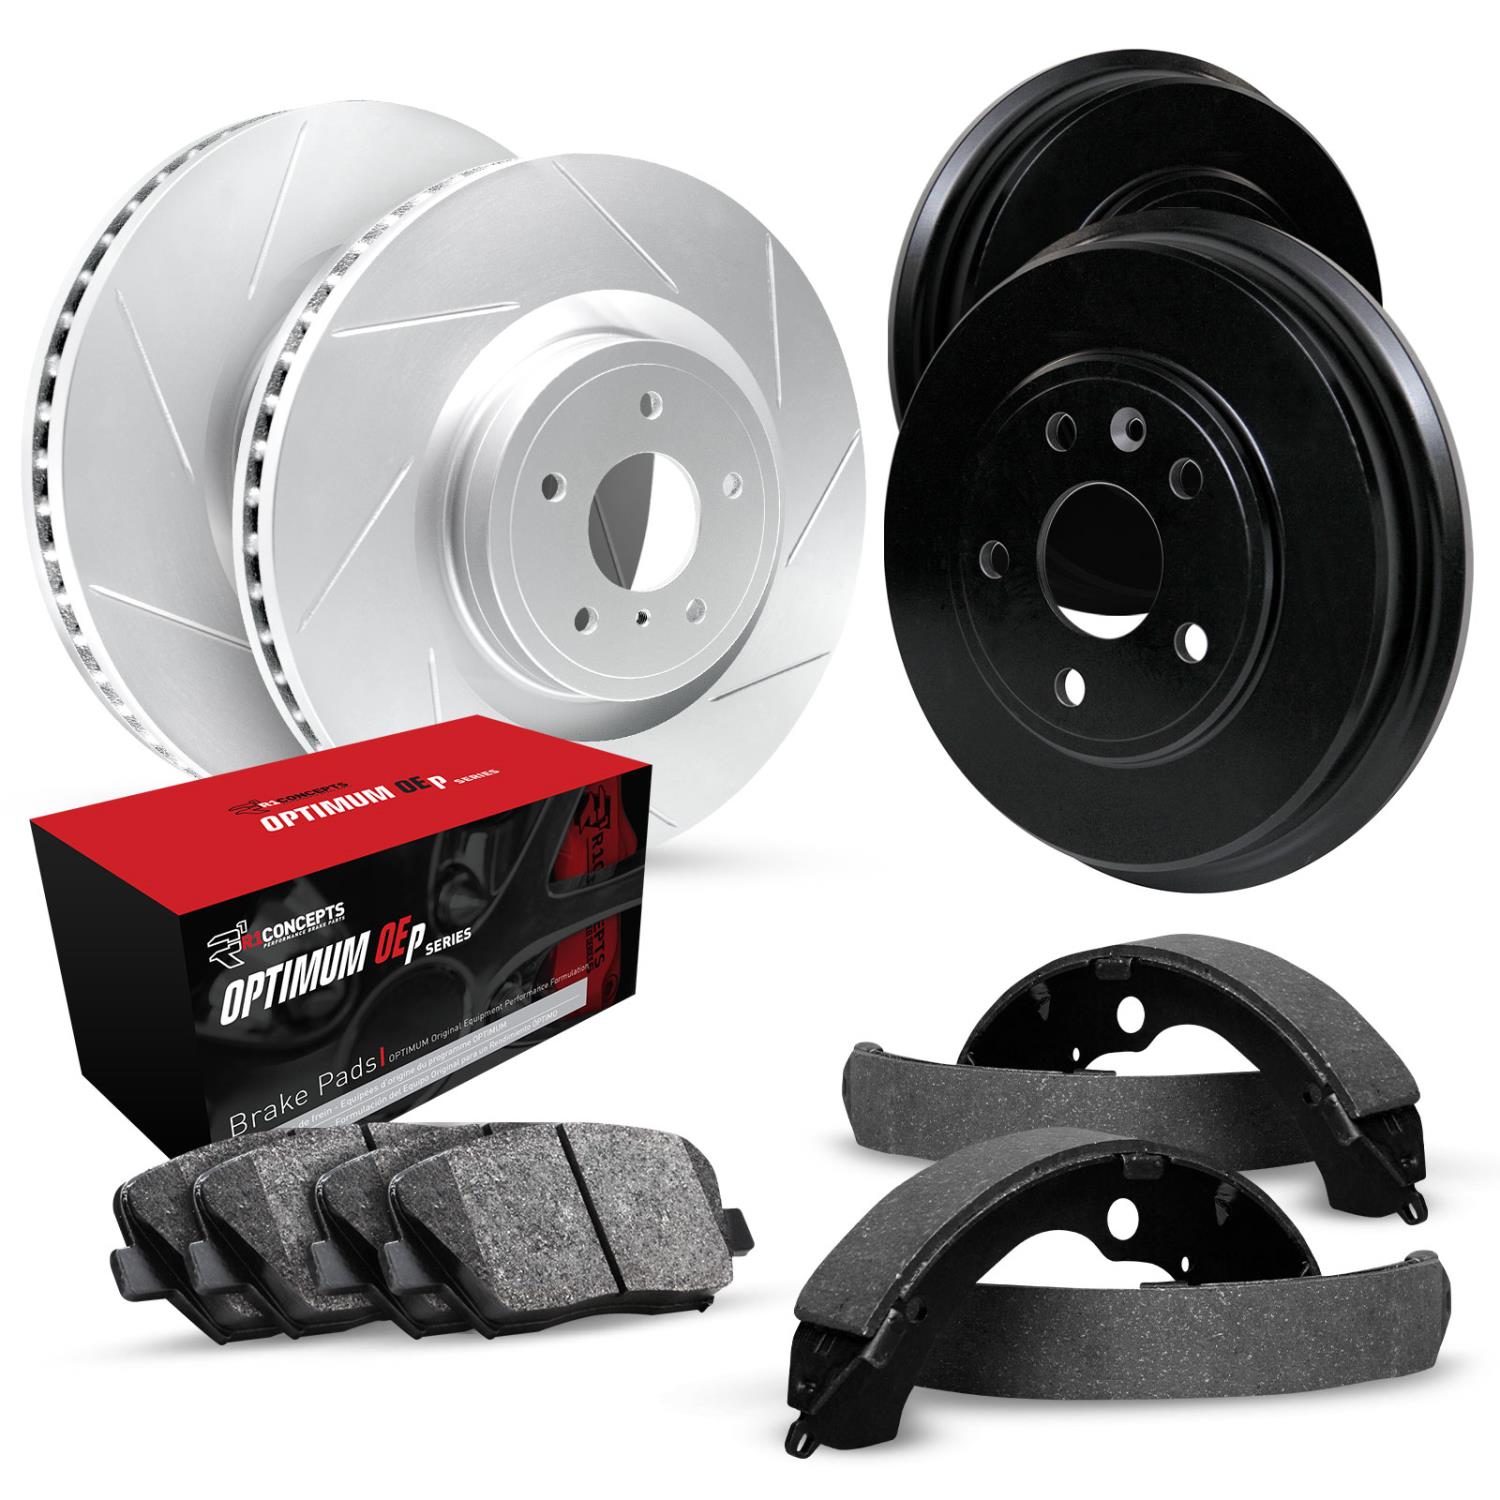 GEO-Carbon Slotted Brake Rotor & Drum Set w/Optimum OE Pads & Shoes, 2008-2015 Mitsubishi, Position: Front & Rear